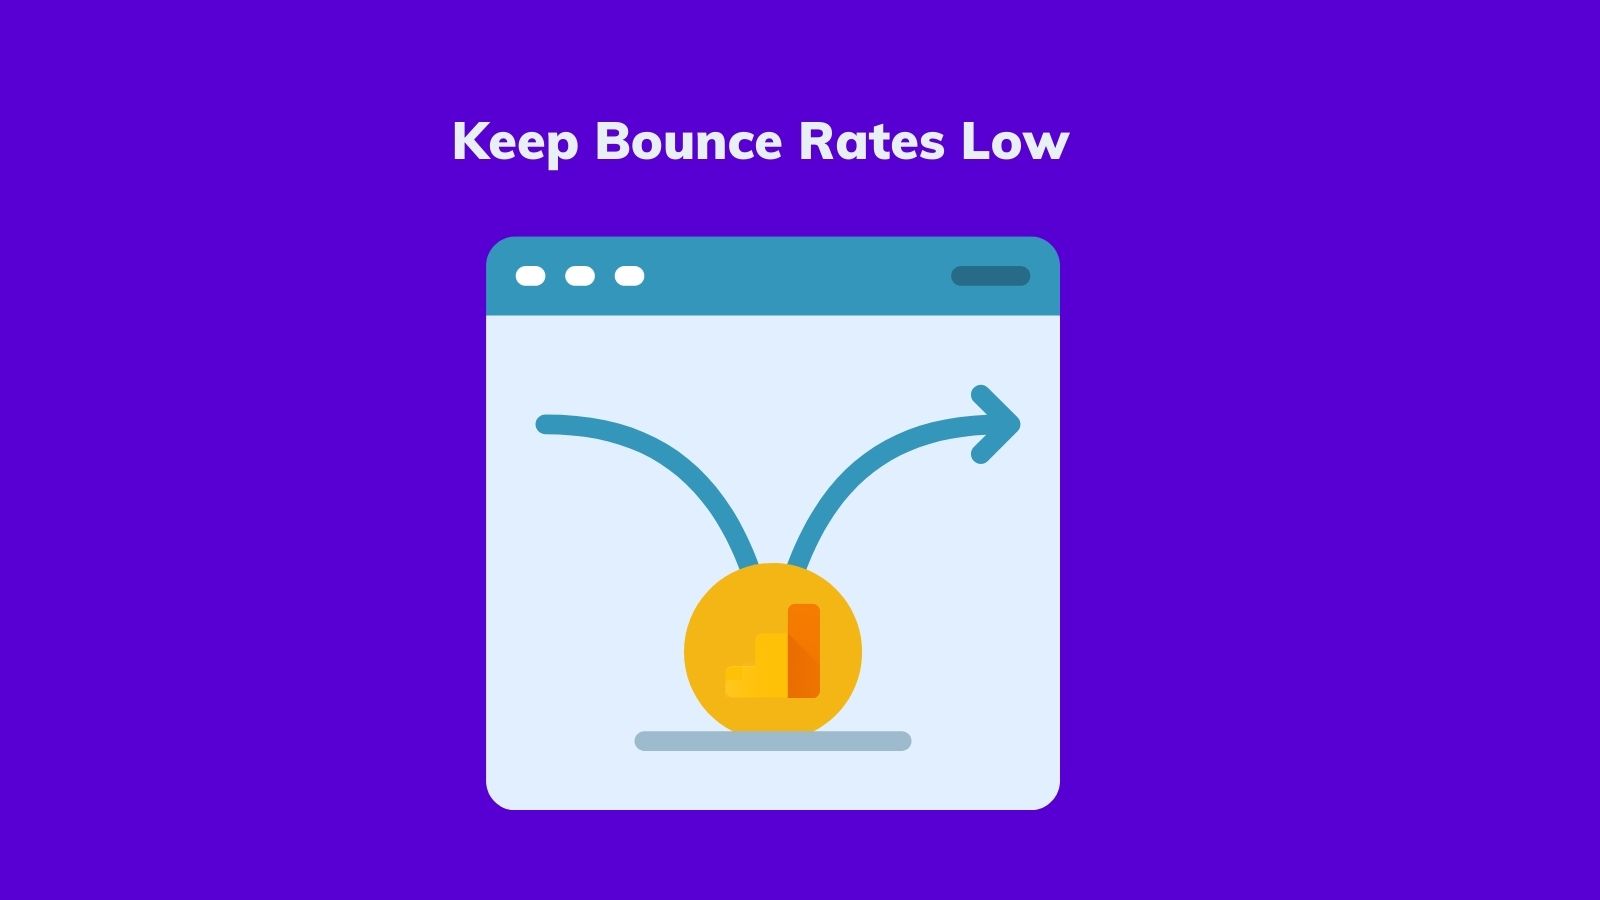 Keep bounce rates low